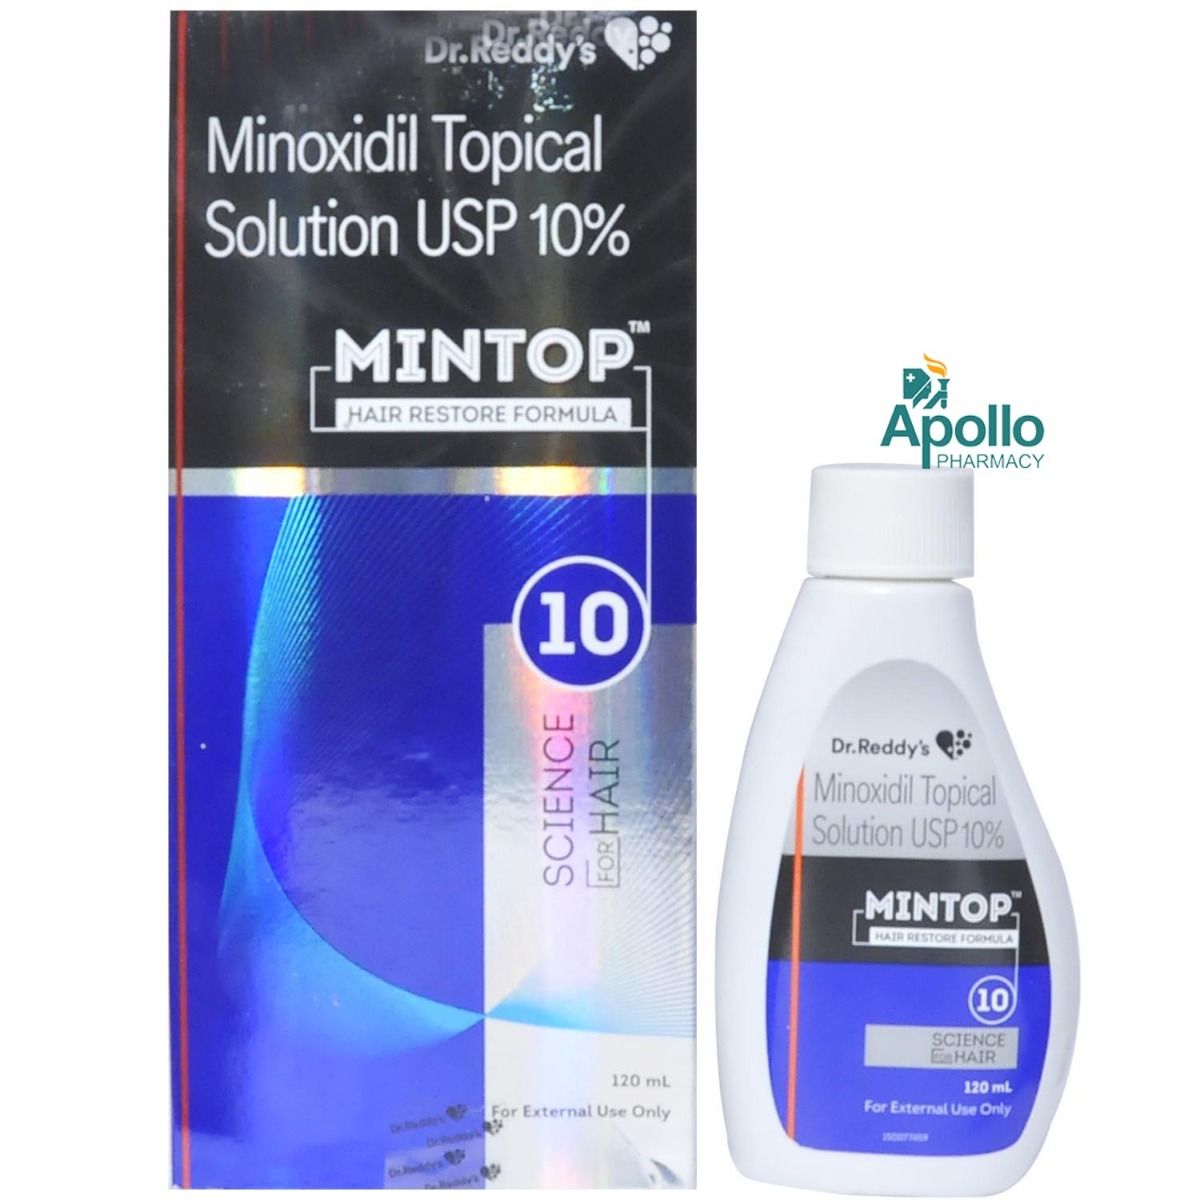 Mintop 10 Hair Restore Formula, 120 ml Price, Uses, Side Effects,  Composition - Apollo Pharmacy